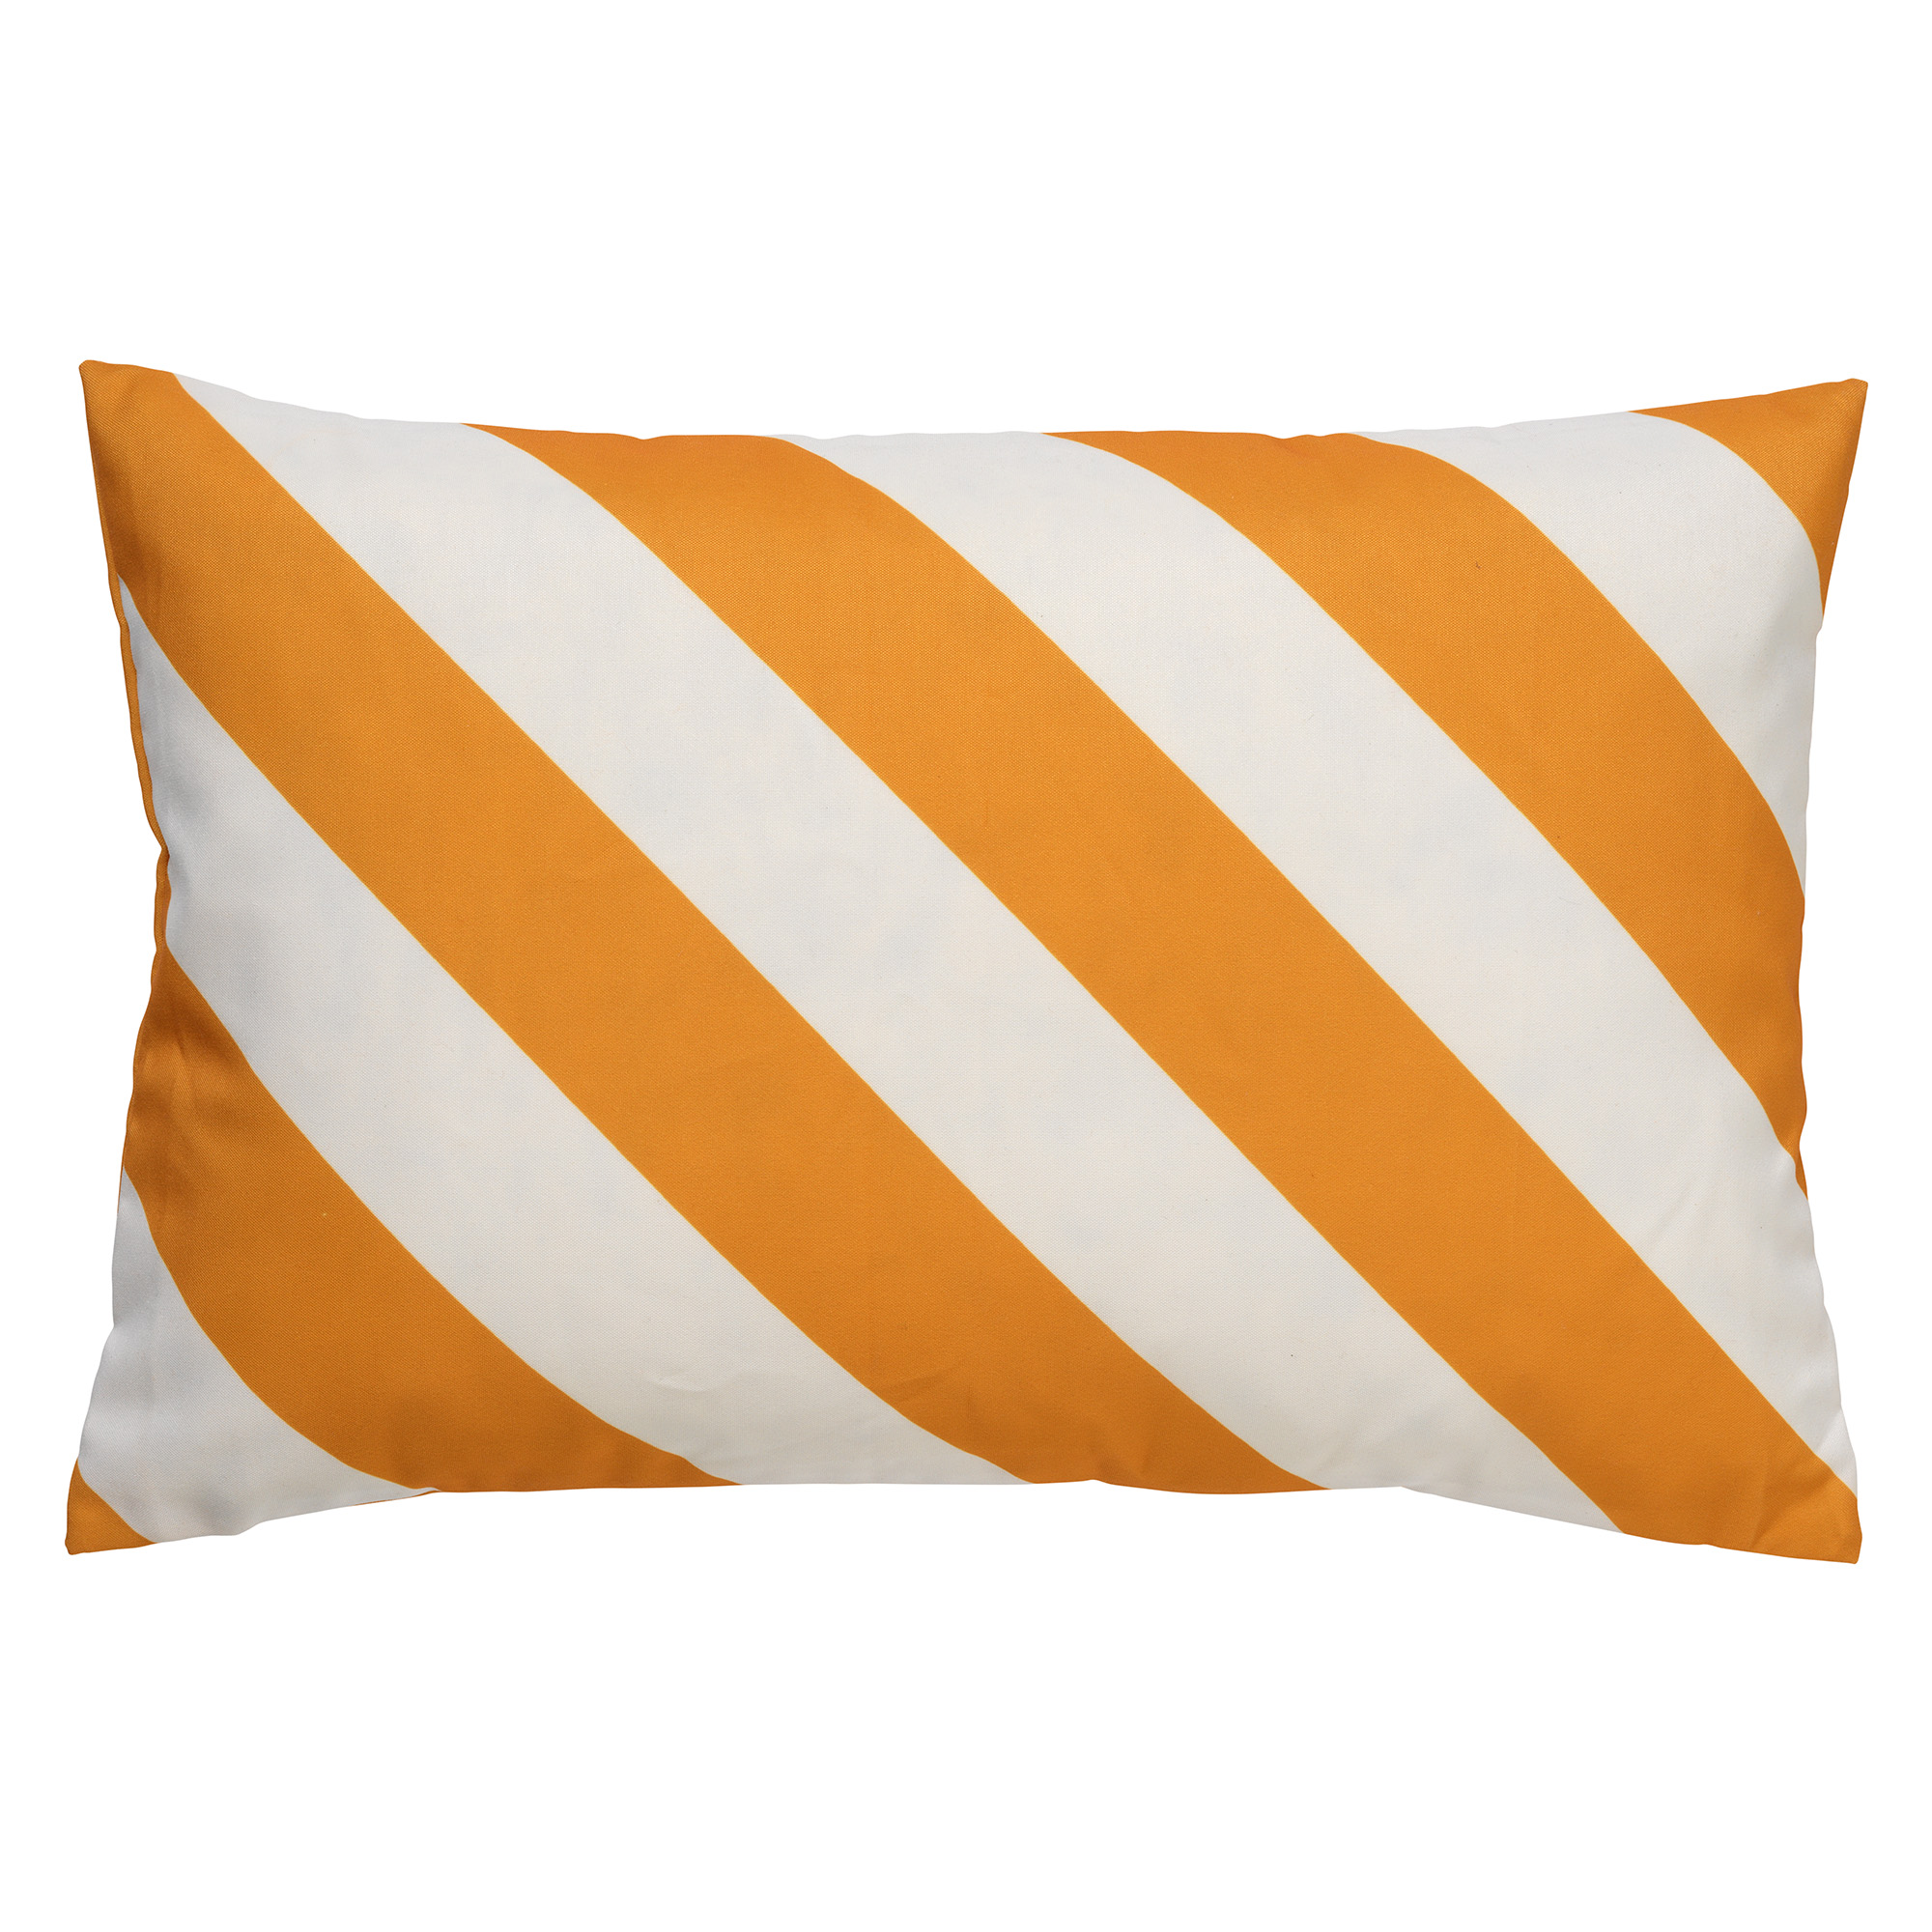 Cushion Sanzeno 40x60 cm Golden Glow - water-repellent and UV-resistant - striped - white and yellow